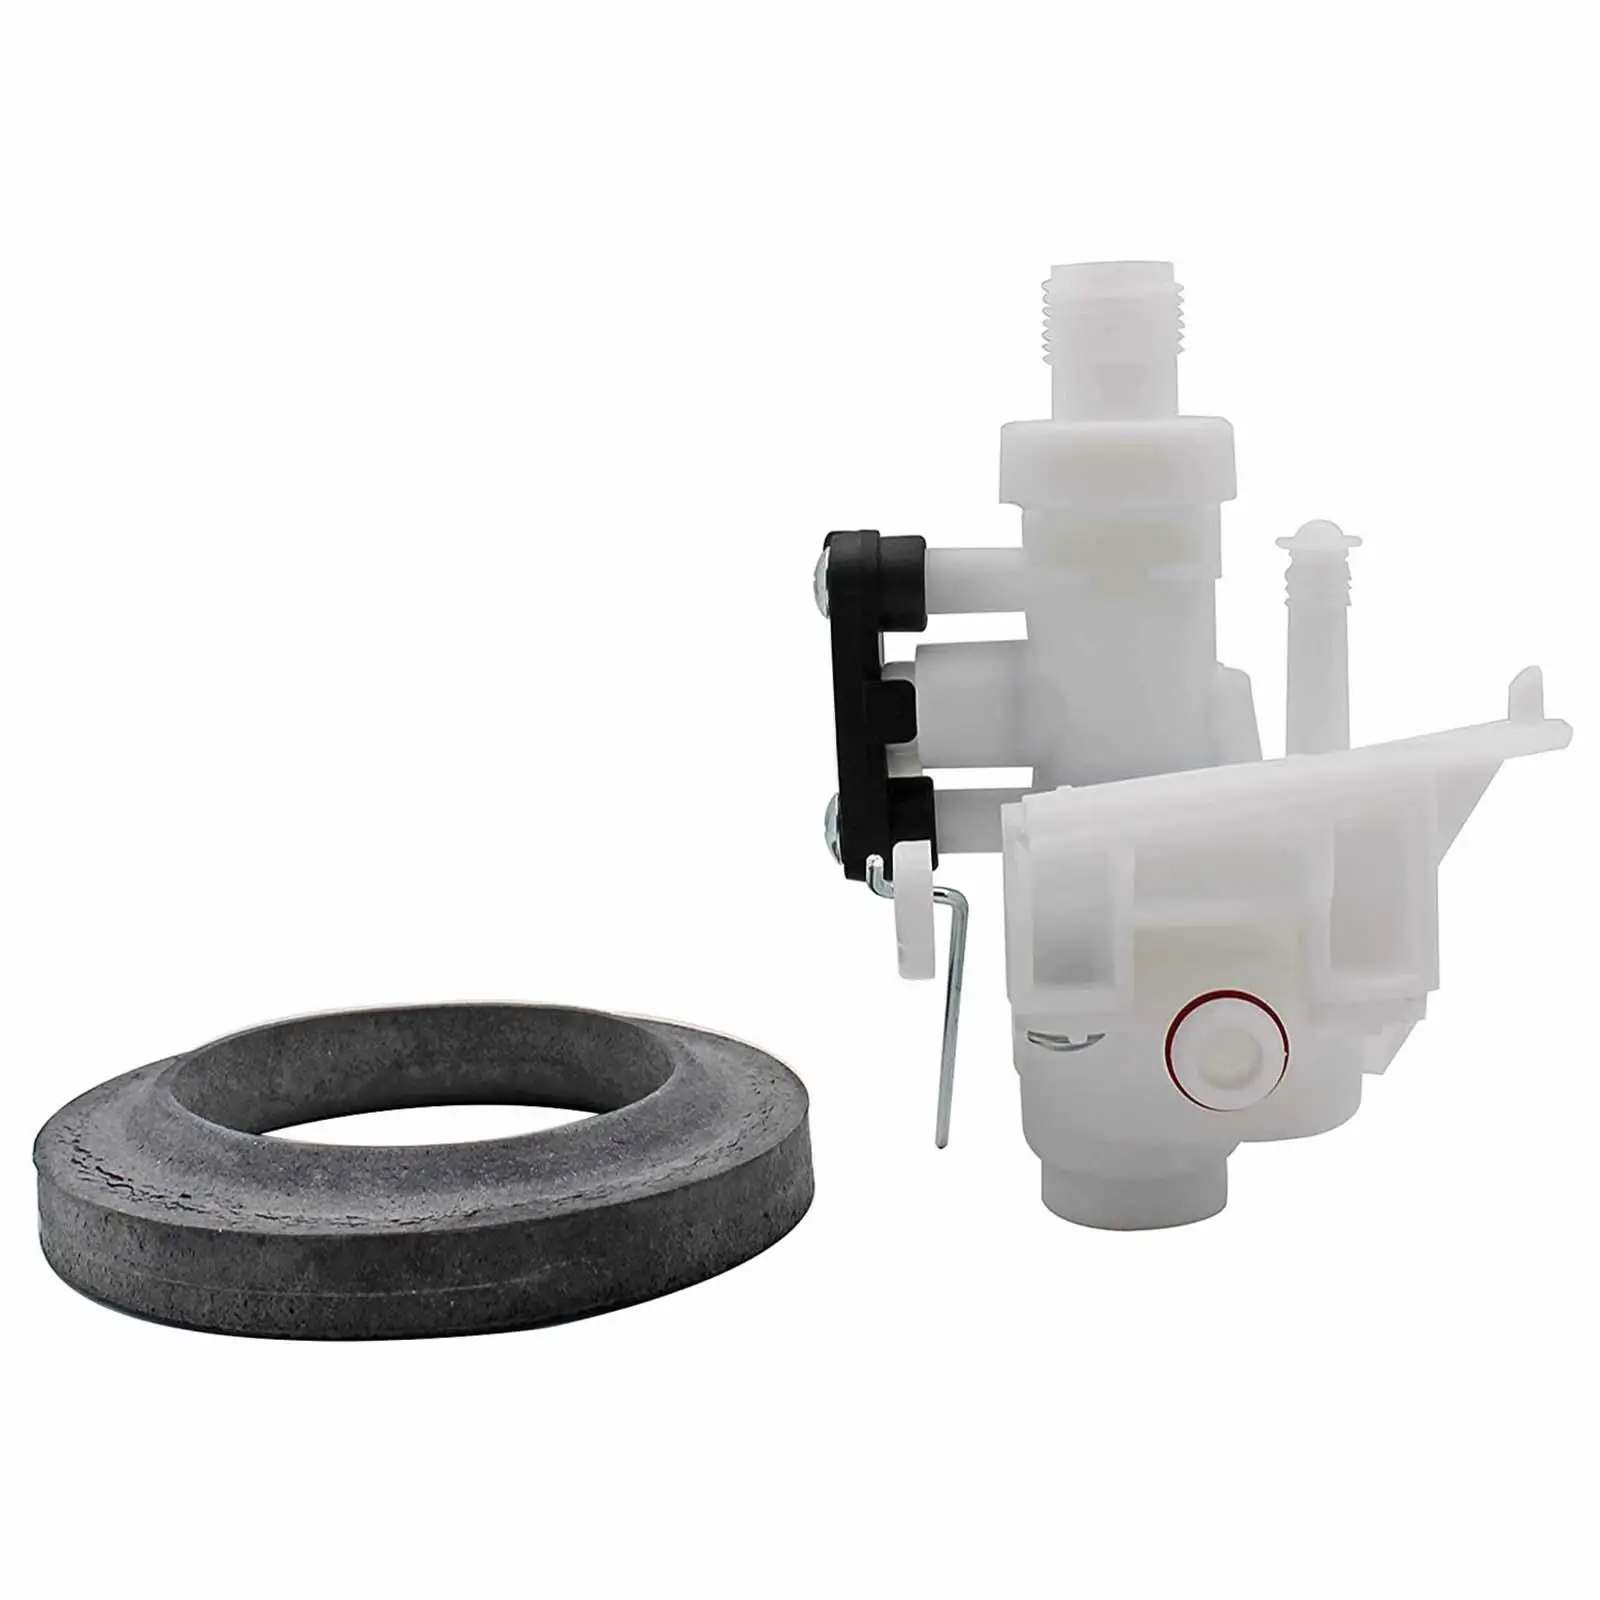 31705 Water Valve Convenient Camper Trailer Toilet Repair Kits RV Toilet Valve with Seal for RV Motor home campers Replace Parts